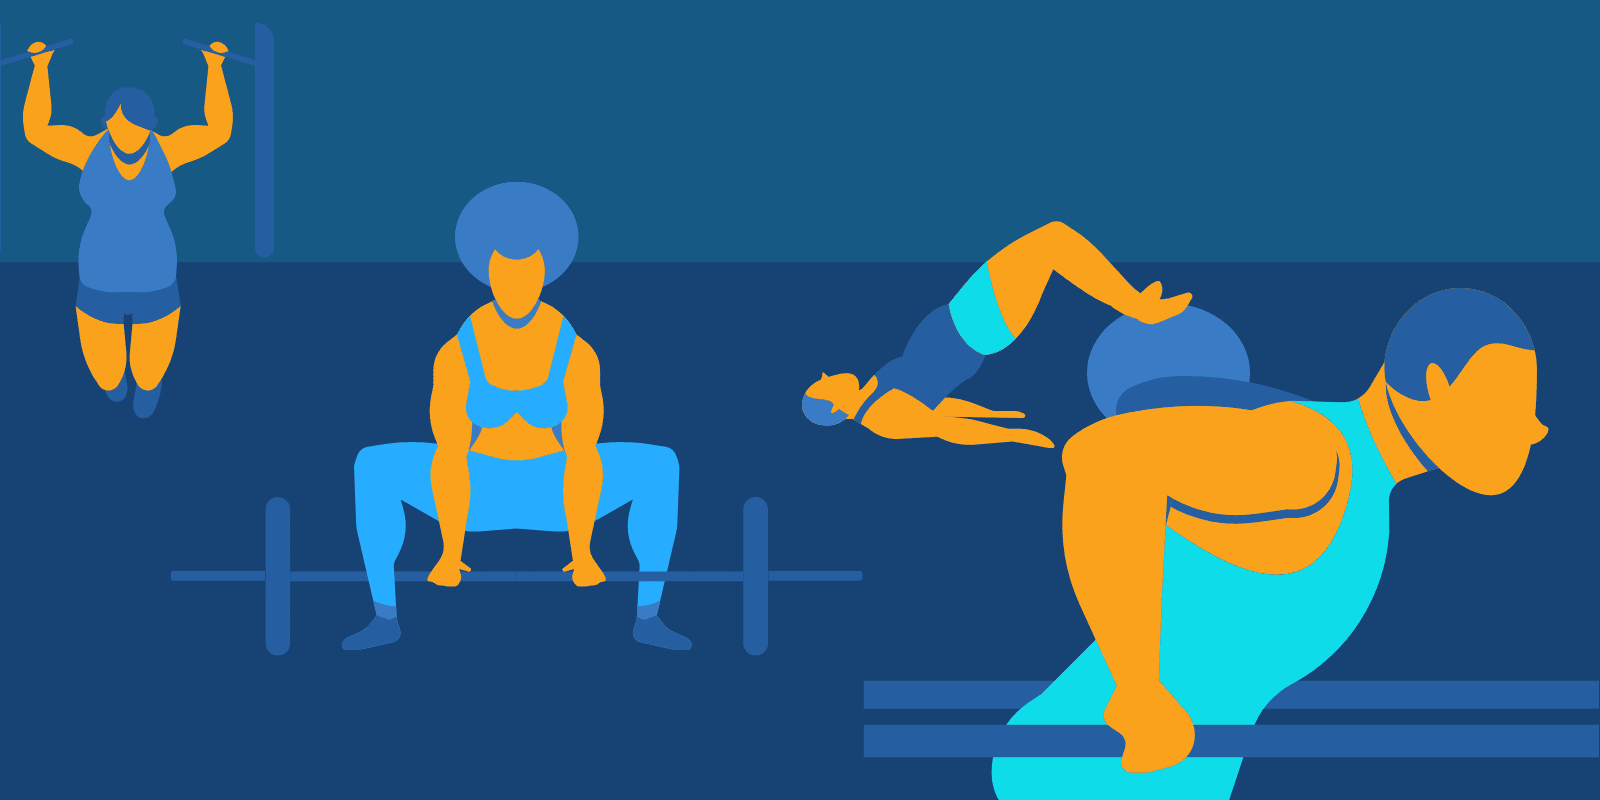 An illustration of 4 people in a gym each working out on a different gym equipment